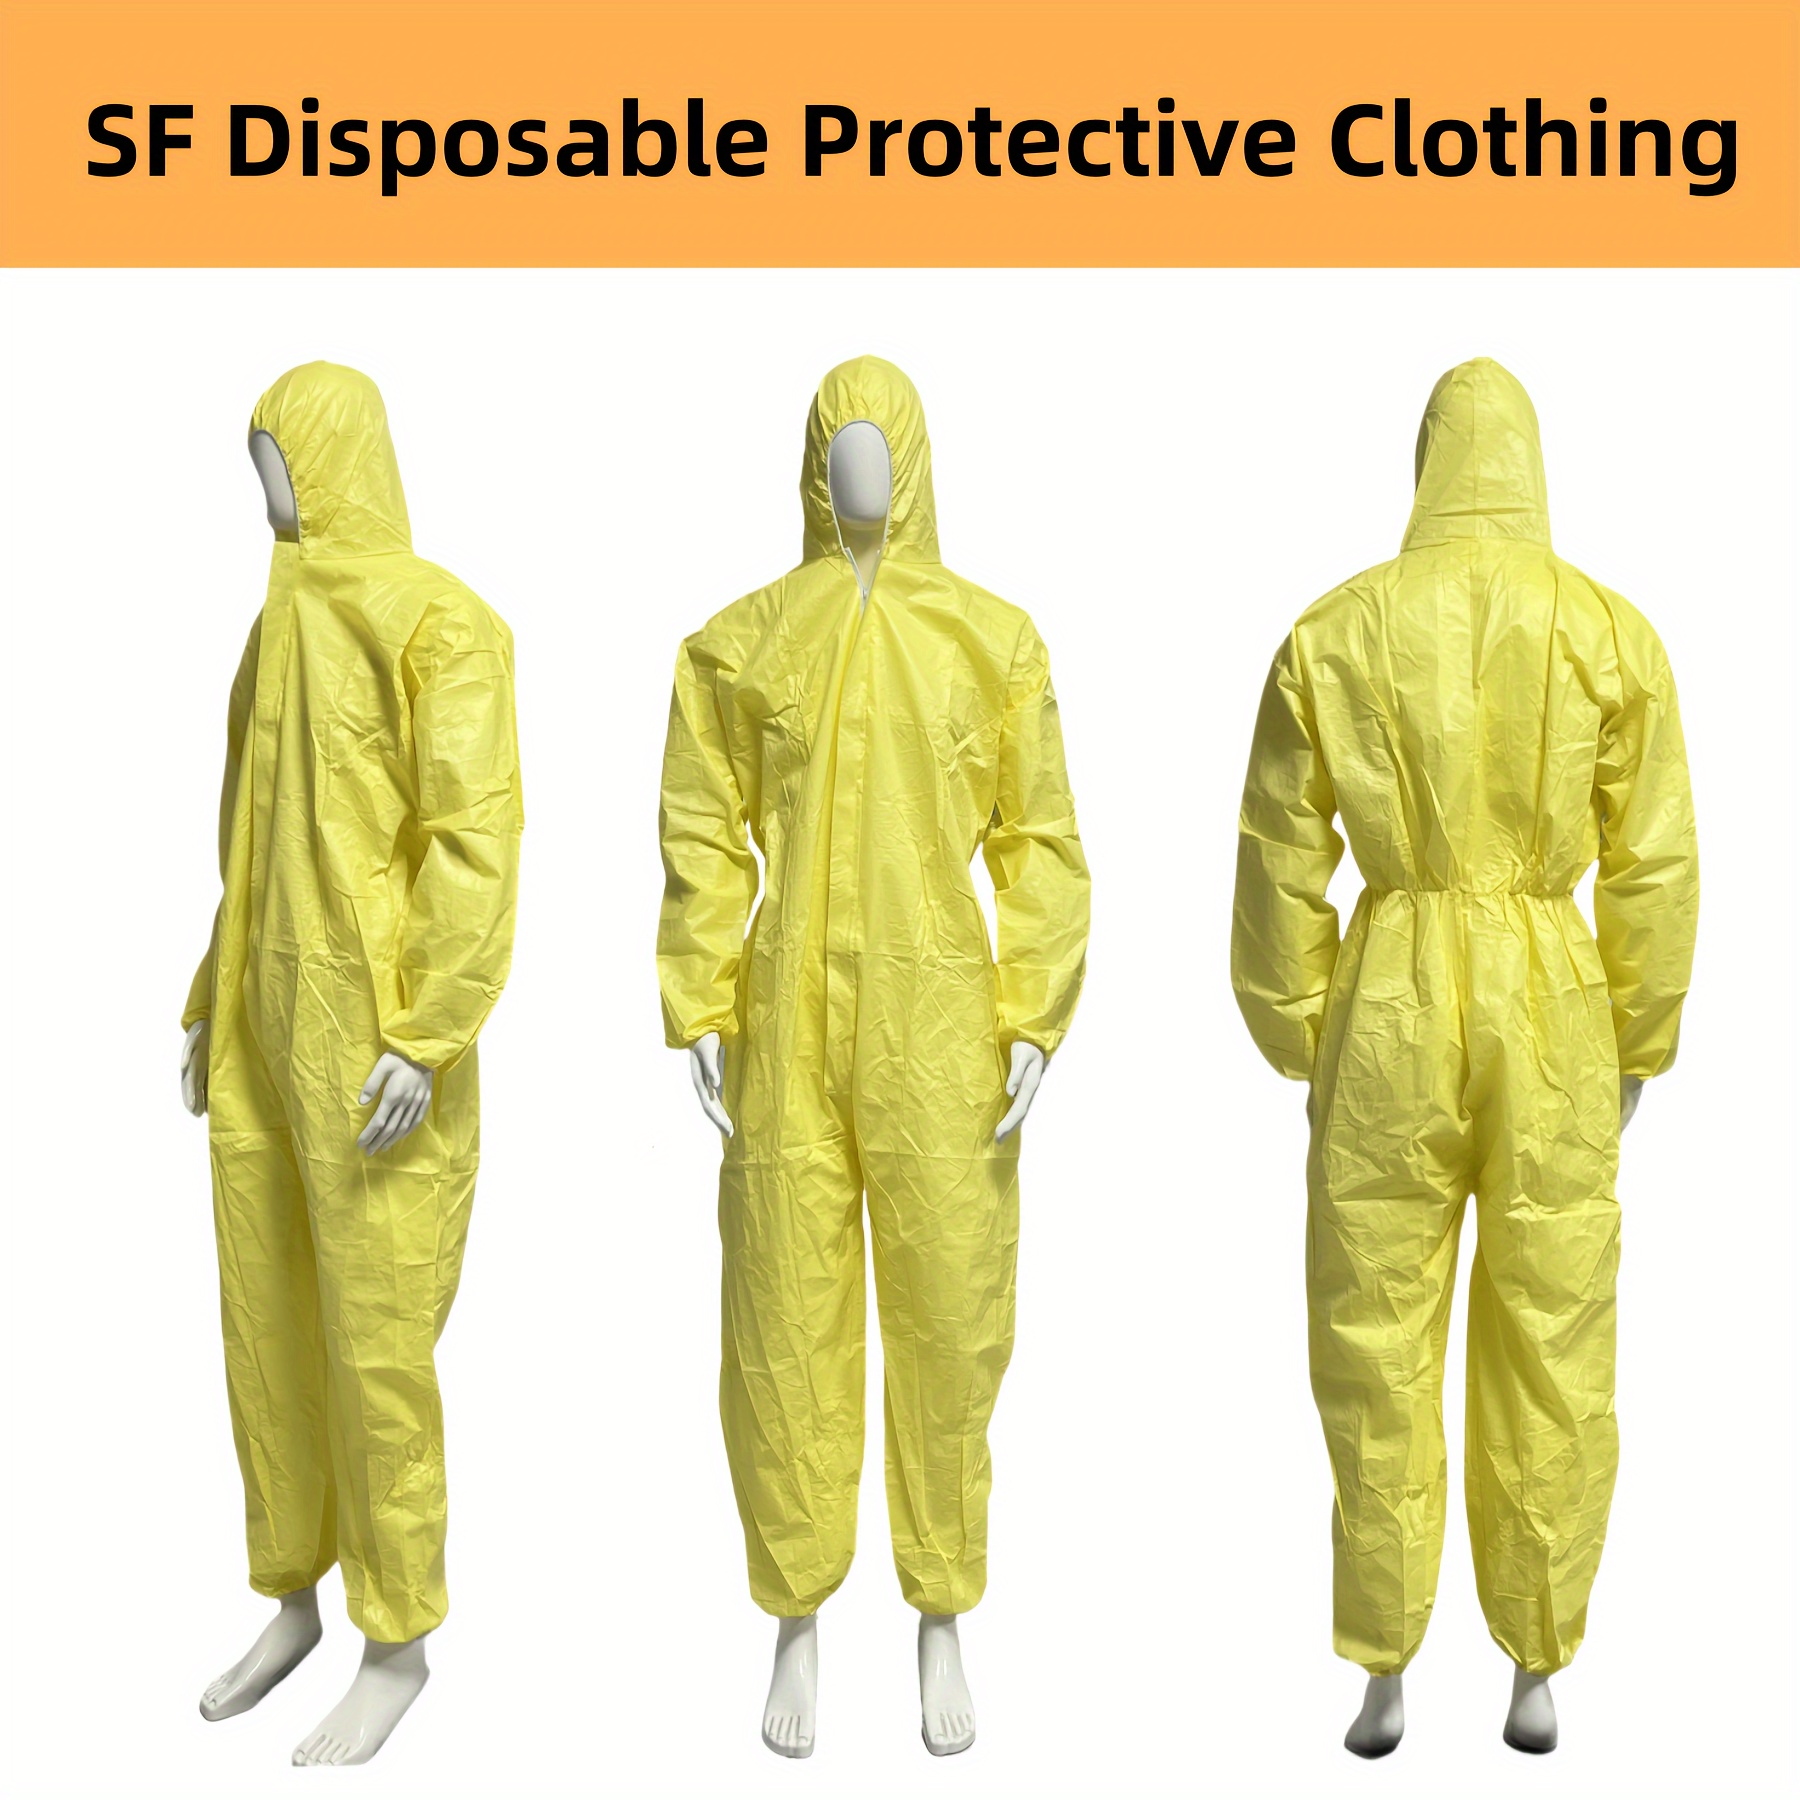 

Disposable Protective Workwear: Yellow Hazardous Material Suit With Hood And Zipper, Small Size Xl, Industrial Chemical Resistant, Polyvinyl Chloride (pvc) Fabric, Loose Fit